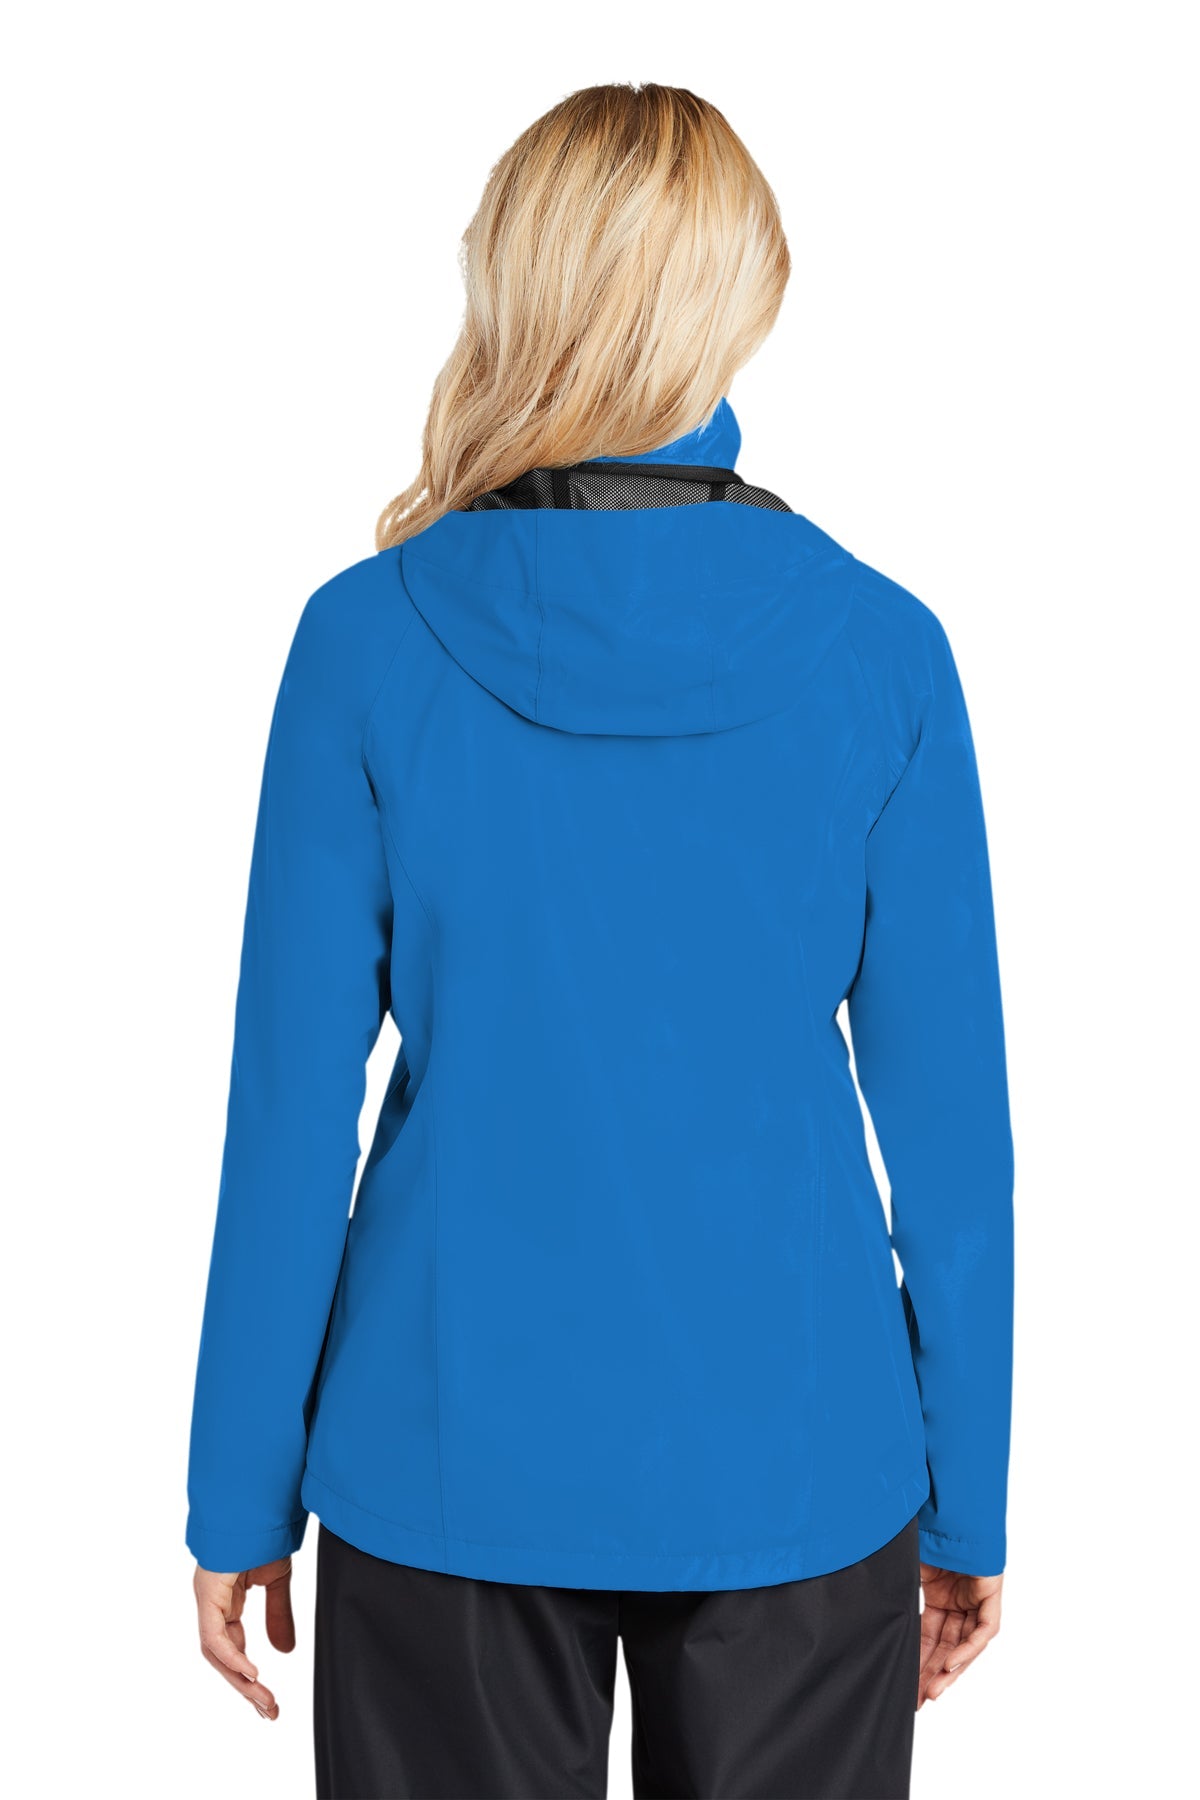 Port Authority Ladies Torrent Customized Waterproof Jackets, Direct Blue